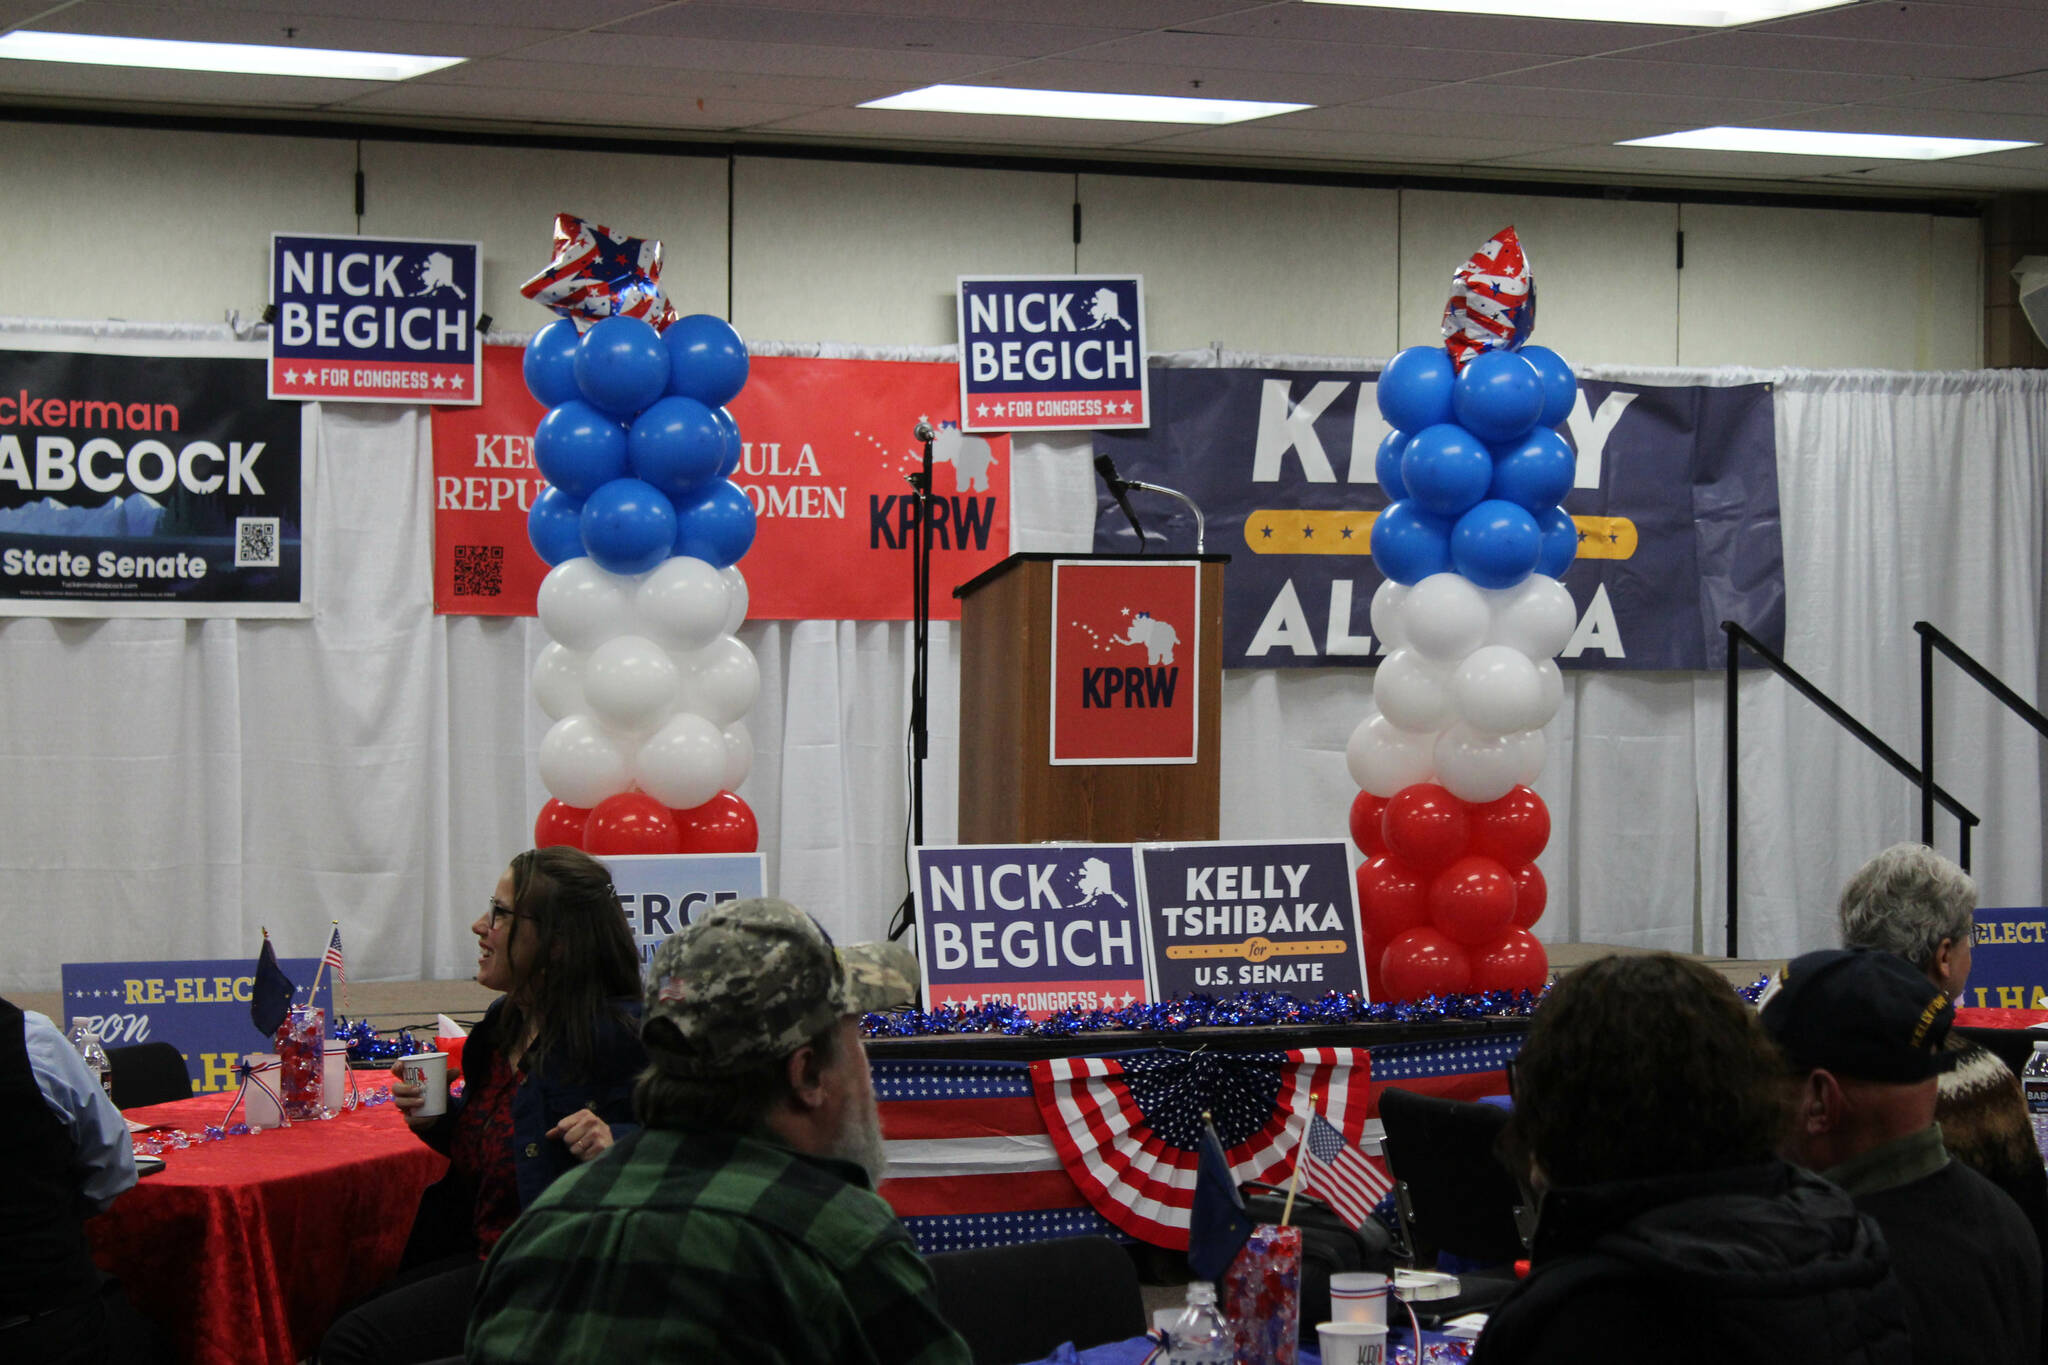 Attendees wait for a “Get Out the Vote” rally hosted by the Kenai Peninsula Republican Women to start at the Soldotna Regional Sports Complex on Tuesday, Oct. 18, 2022, in Soldotna, Alaska. (Ashlyn O’Hara/Peninsula Clarion)